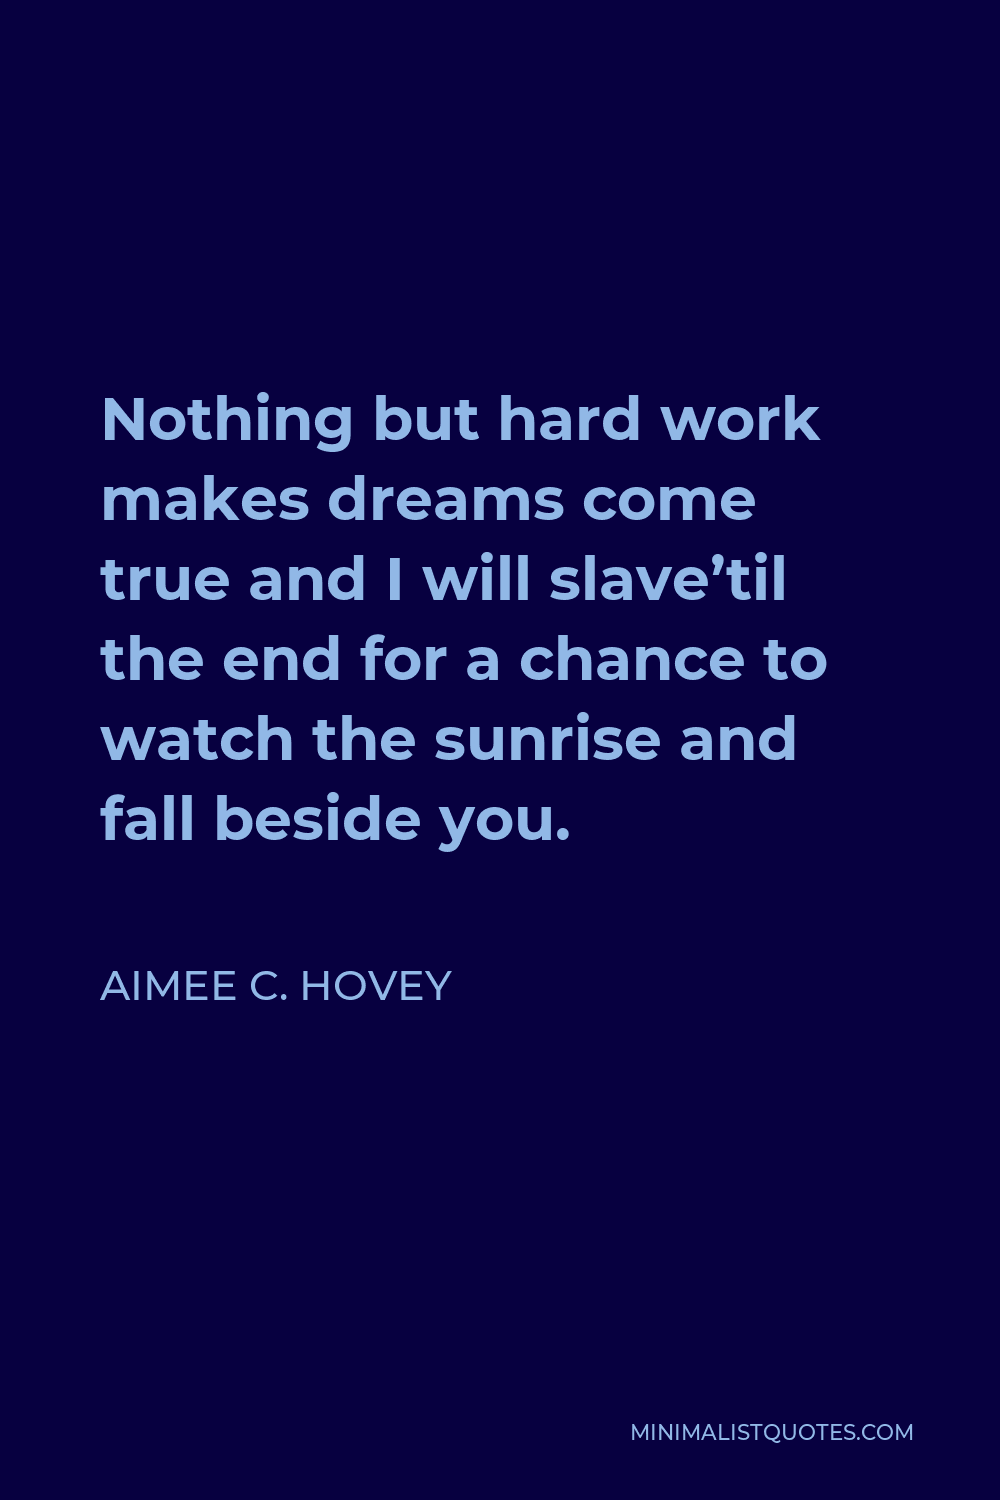 Aimee C. Hovey Quote - Nothing but hard work makes dreams come true and I will slave’til the end for a chance to watch the sunrise and fall beside you.